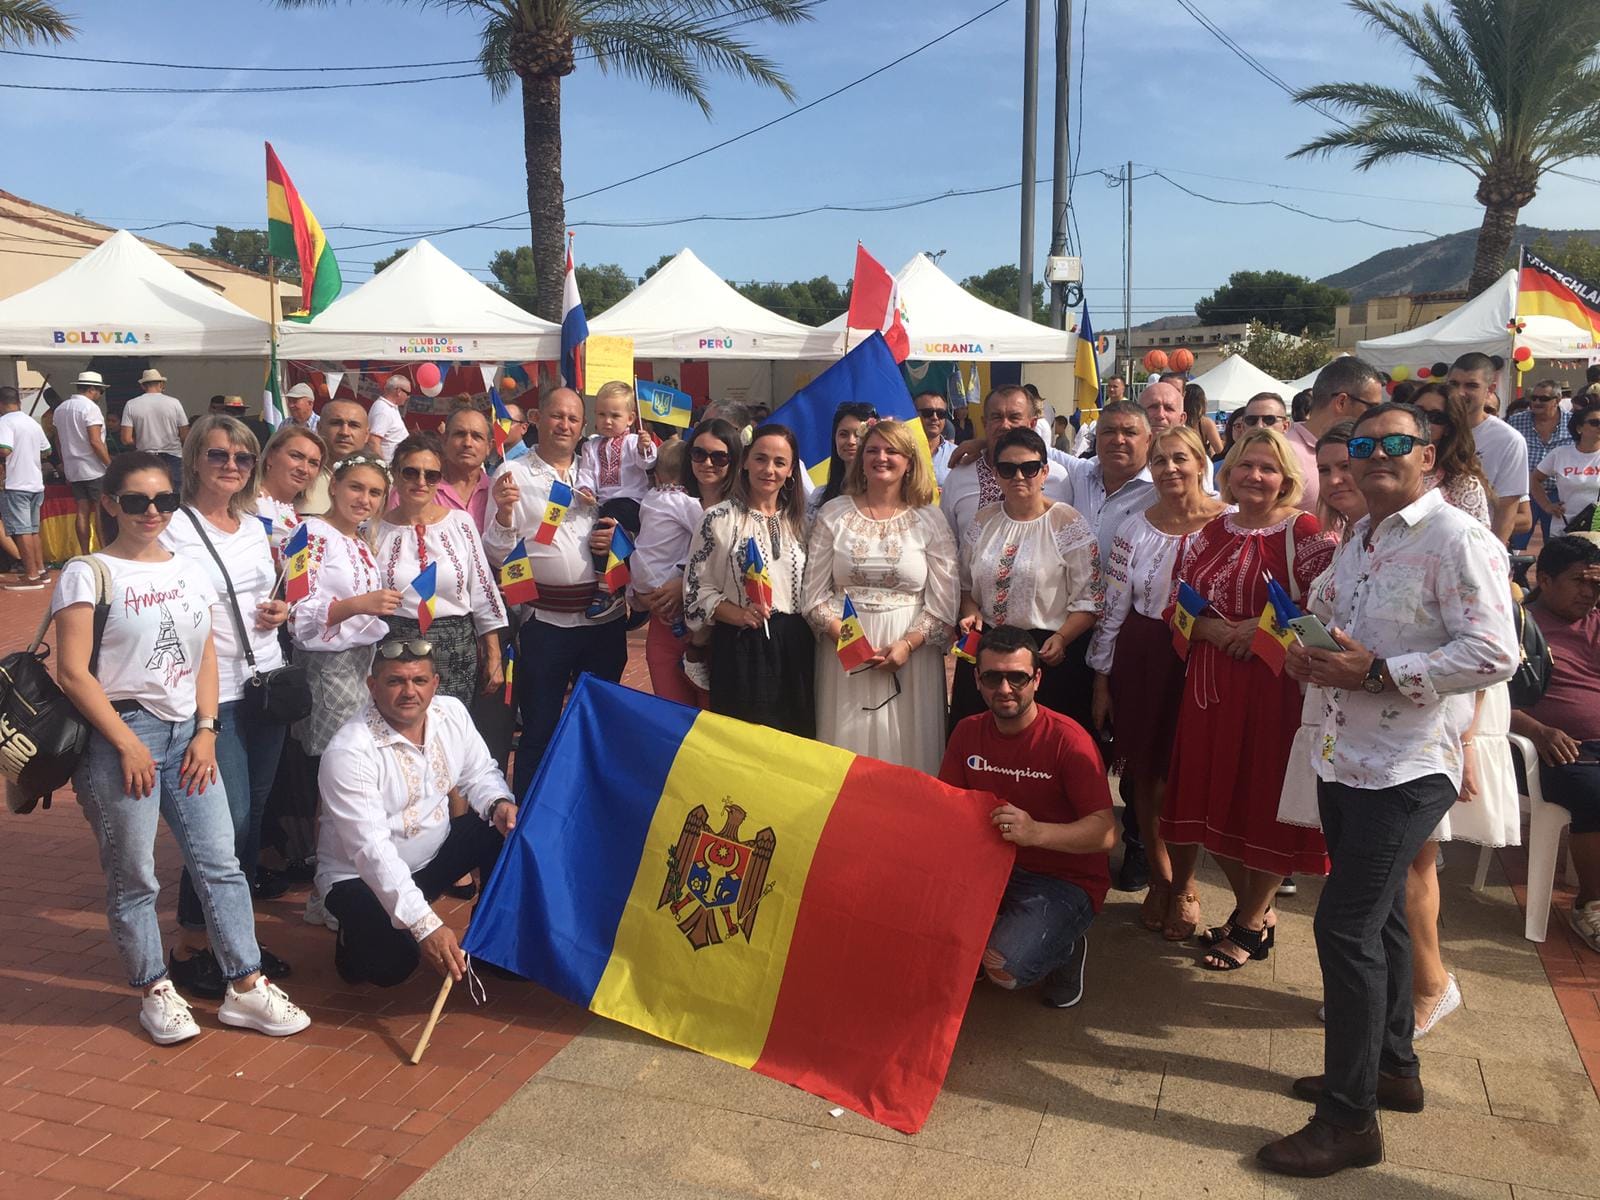 The Moldovan community from Benidorm, Spain participated at the event dedicated to Nationalities Day in Alfas del Pi